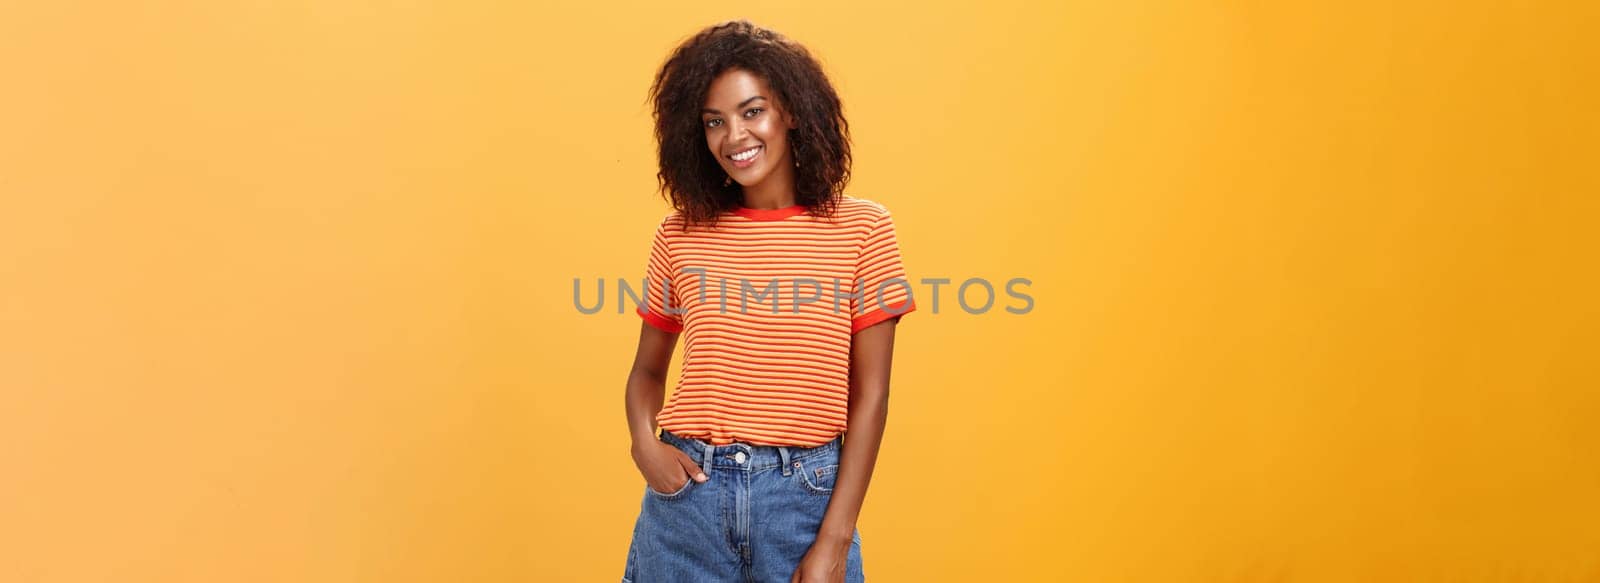 Ready to travel world. Energetic confident and attractive dark-skinned woman with curly hair holding hand in pocket of denim shorts smiling joyfully posing over orange background carefree and friendly by Benzoix